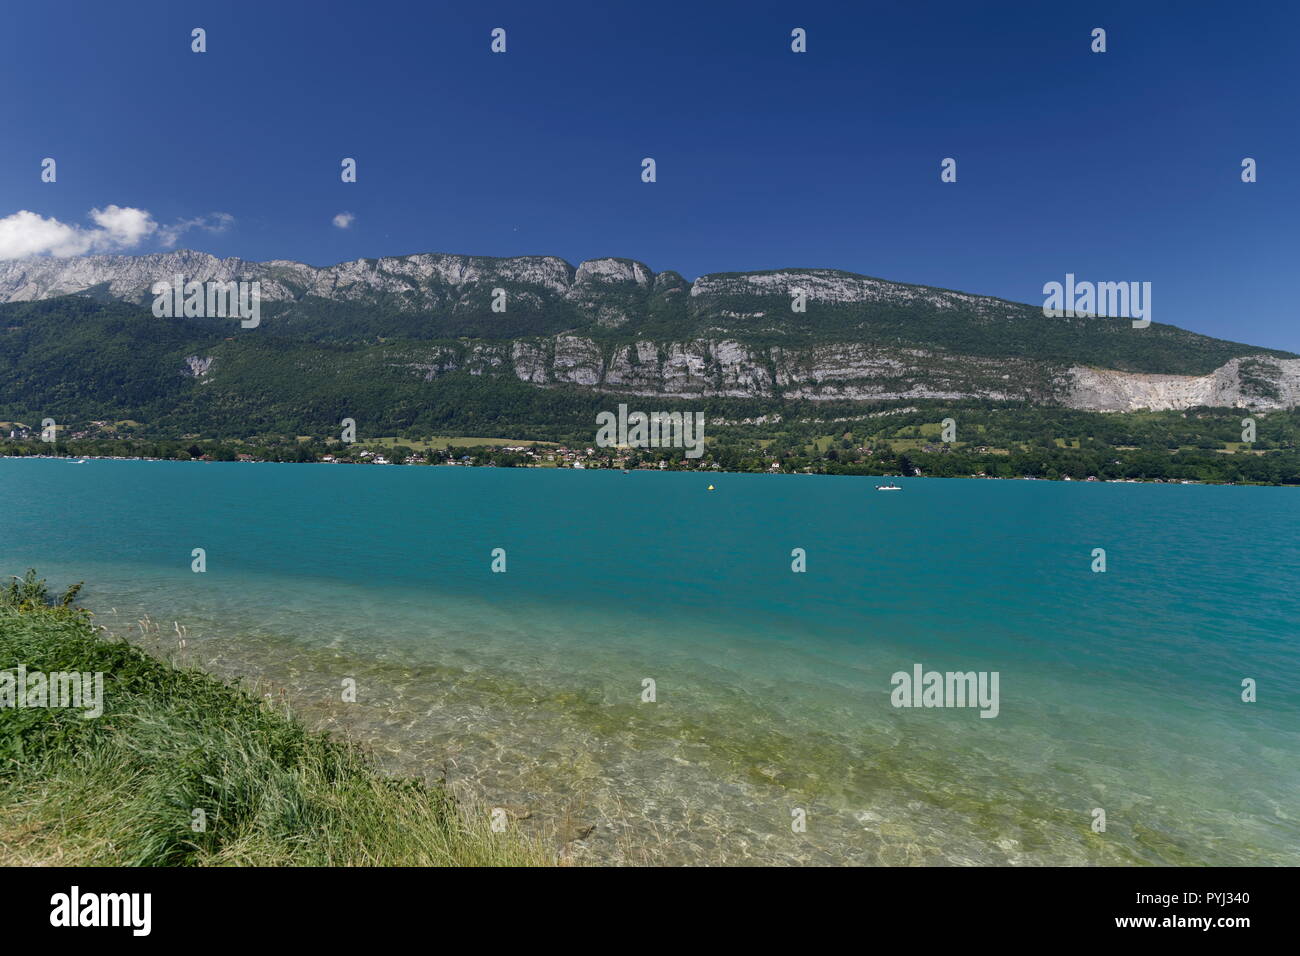 Beautiful clear turqoise water of Lake Annecy with boats and distant mountains France Stock Photo